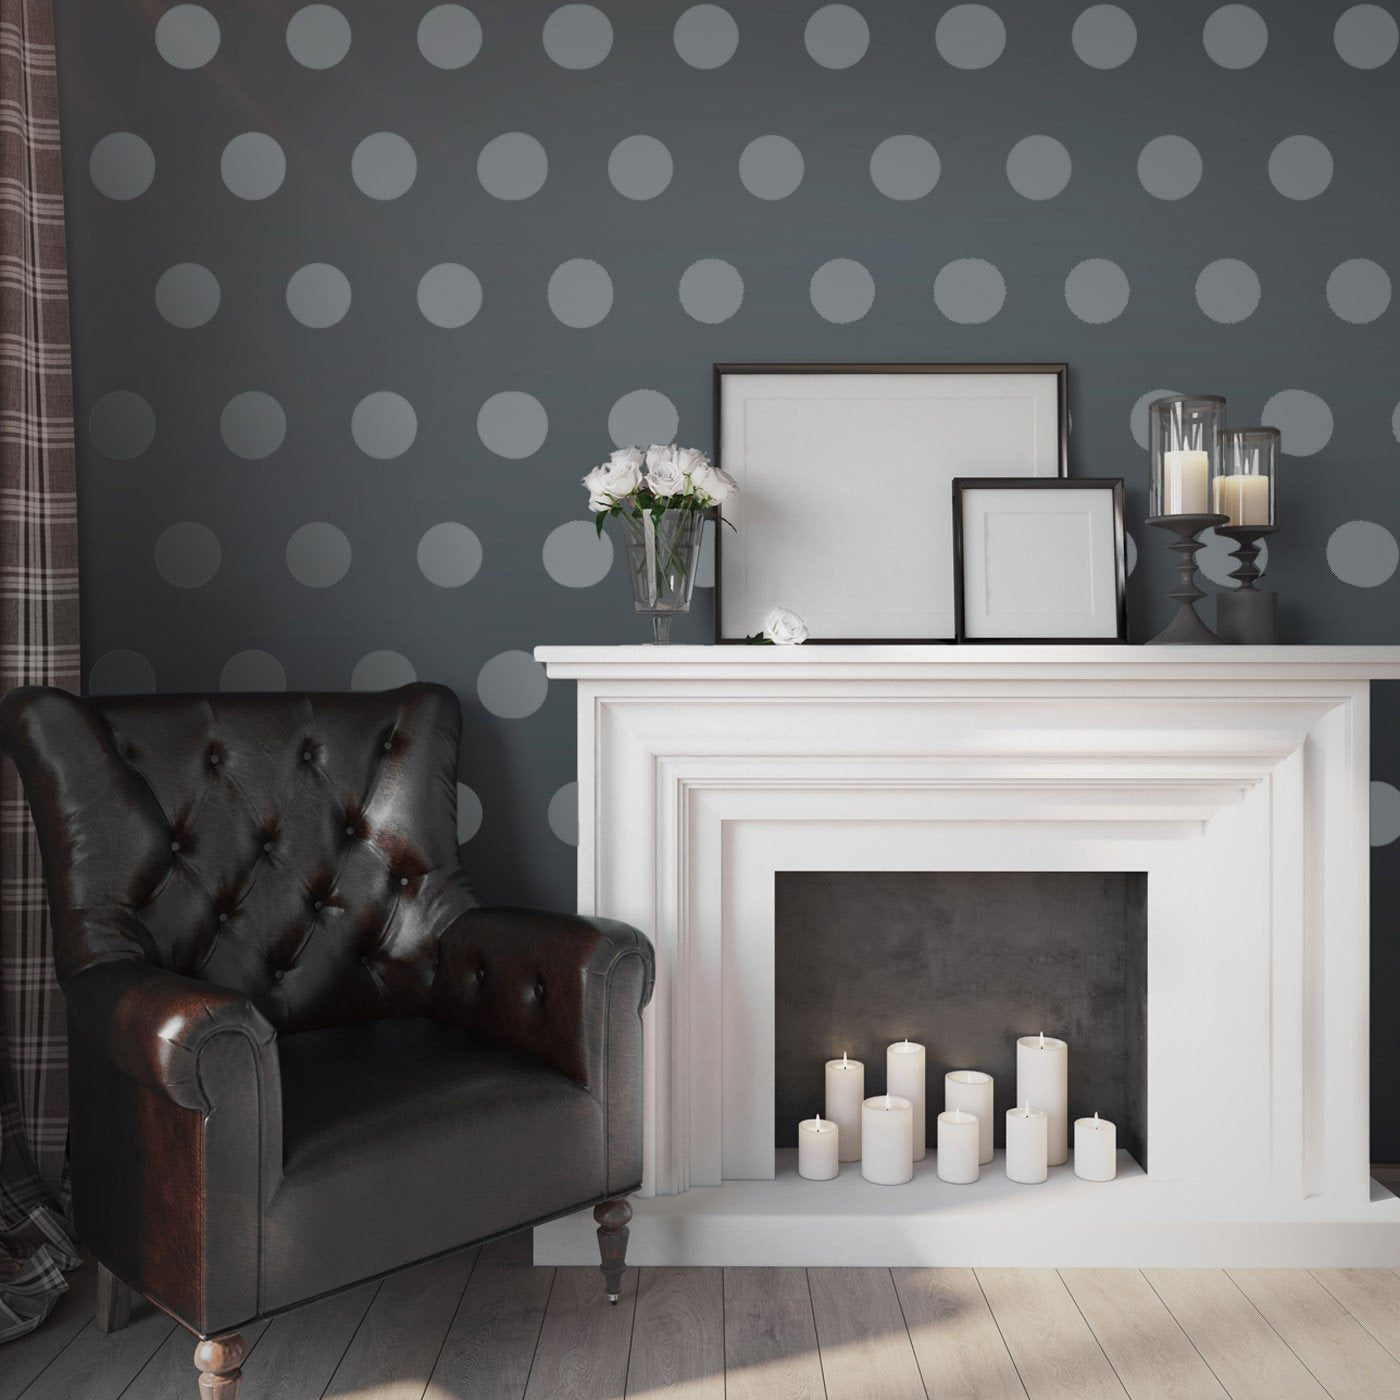 Large Polka Dot Pattern Wall Stencil in living room